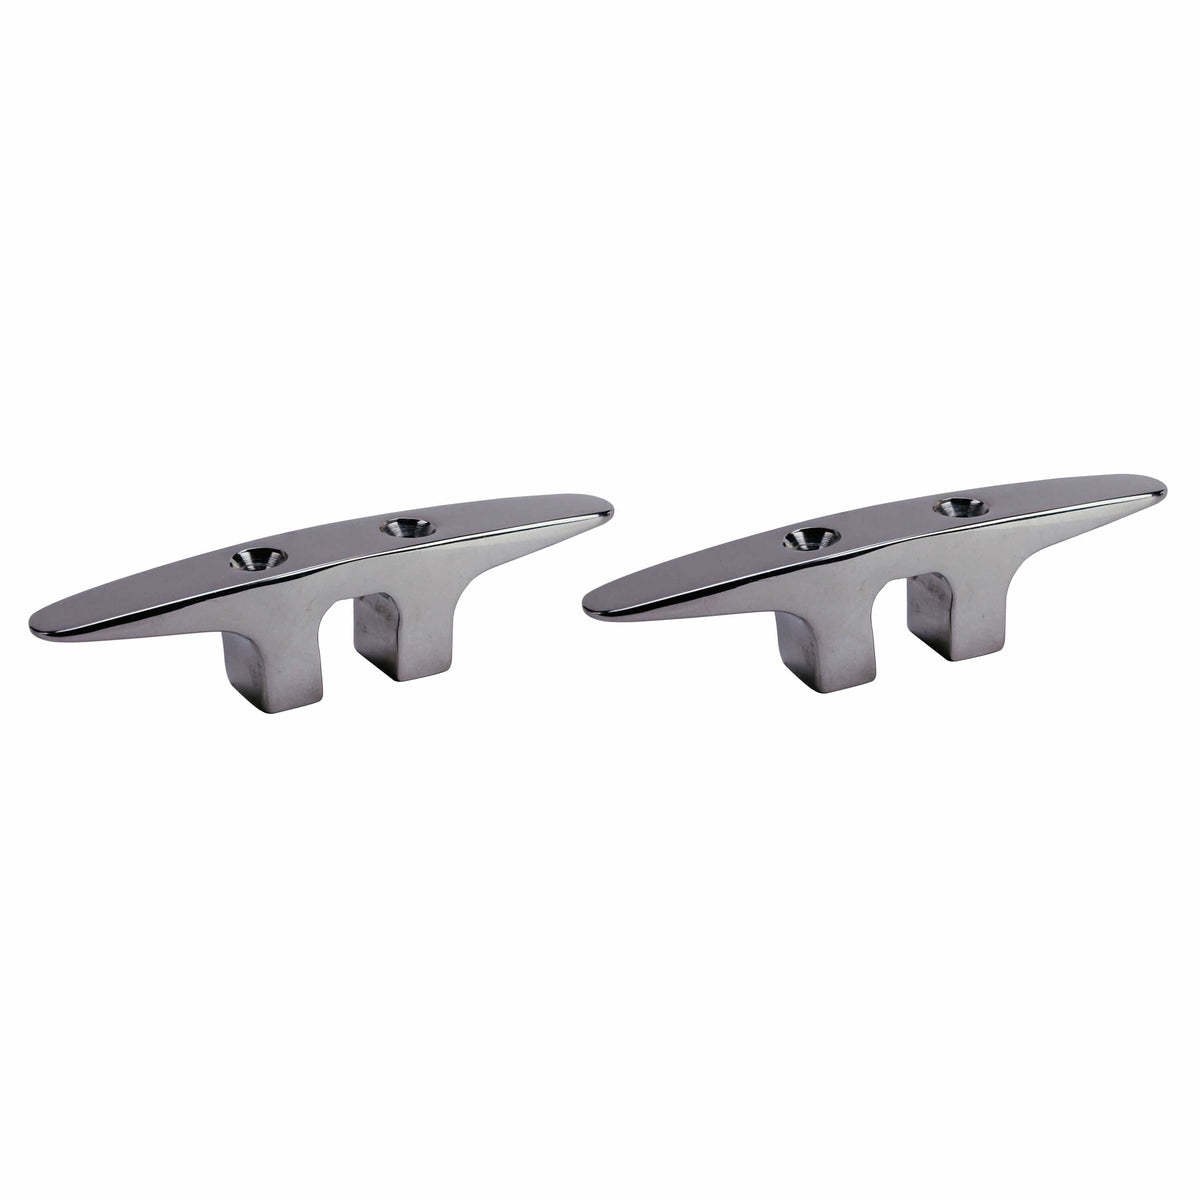 Extreme Max Soft Point SS Dock Cleat 4.5" 2-pk #3006.6759.2